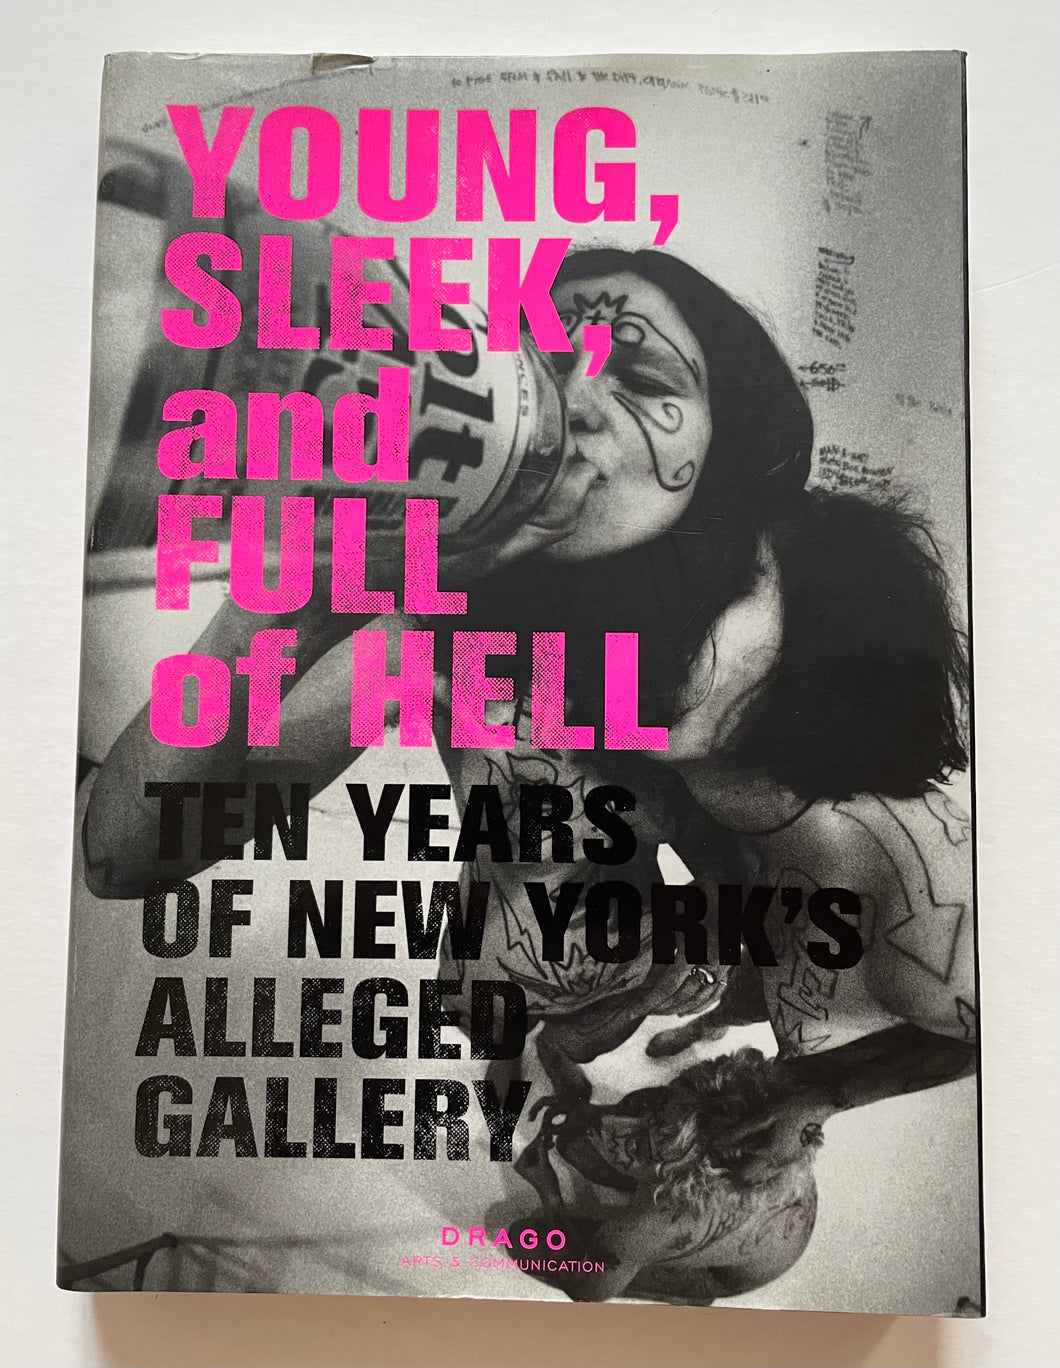 Young Sleek and Full of Hell: Ten Years of New York's Alleged Gallery | Aaron Rose (Drago)